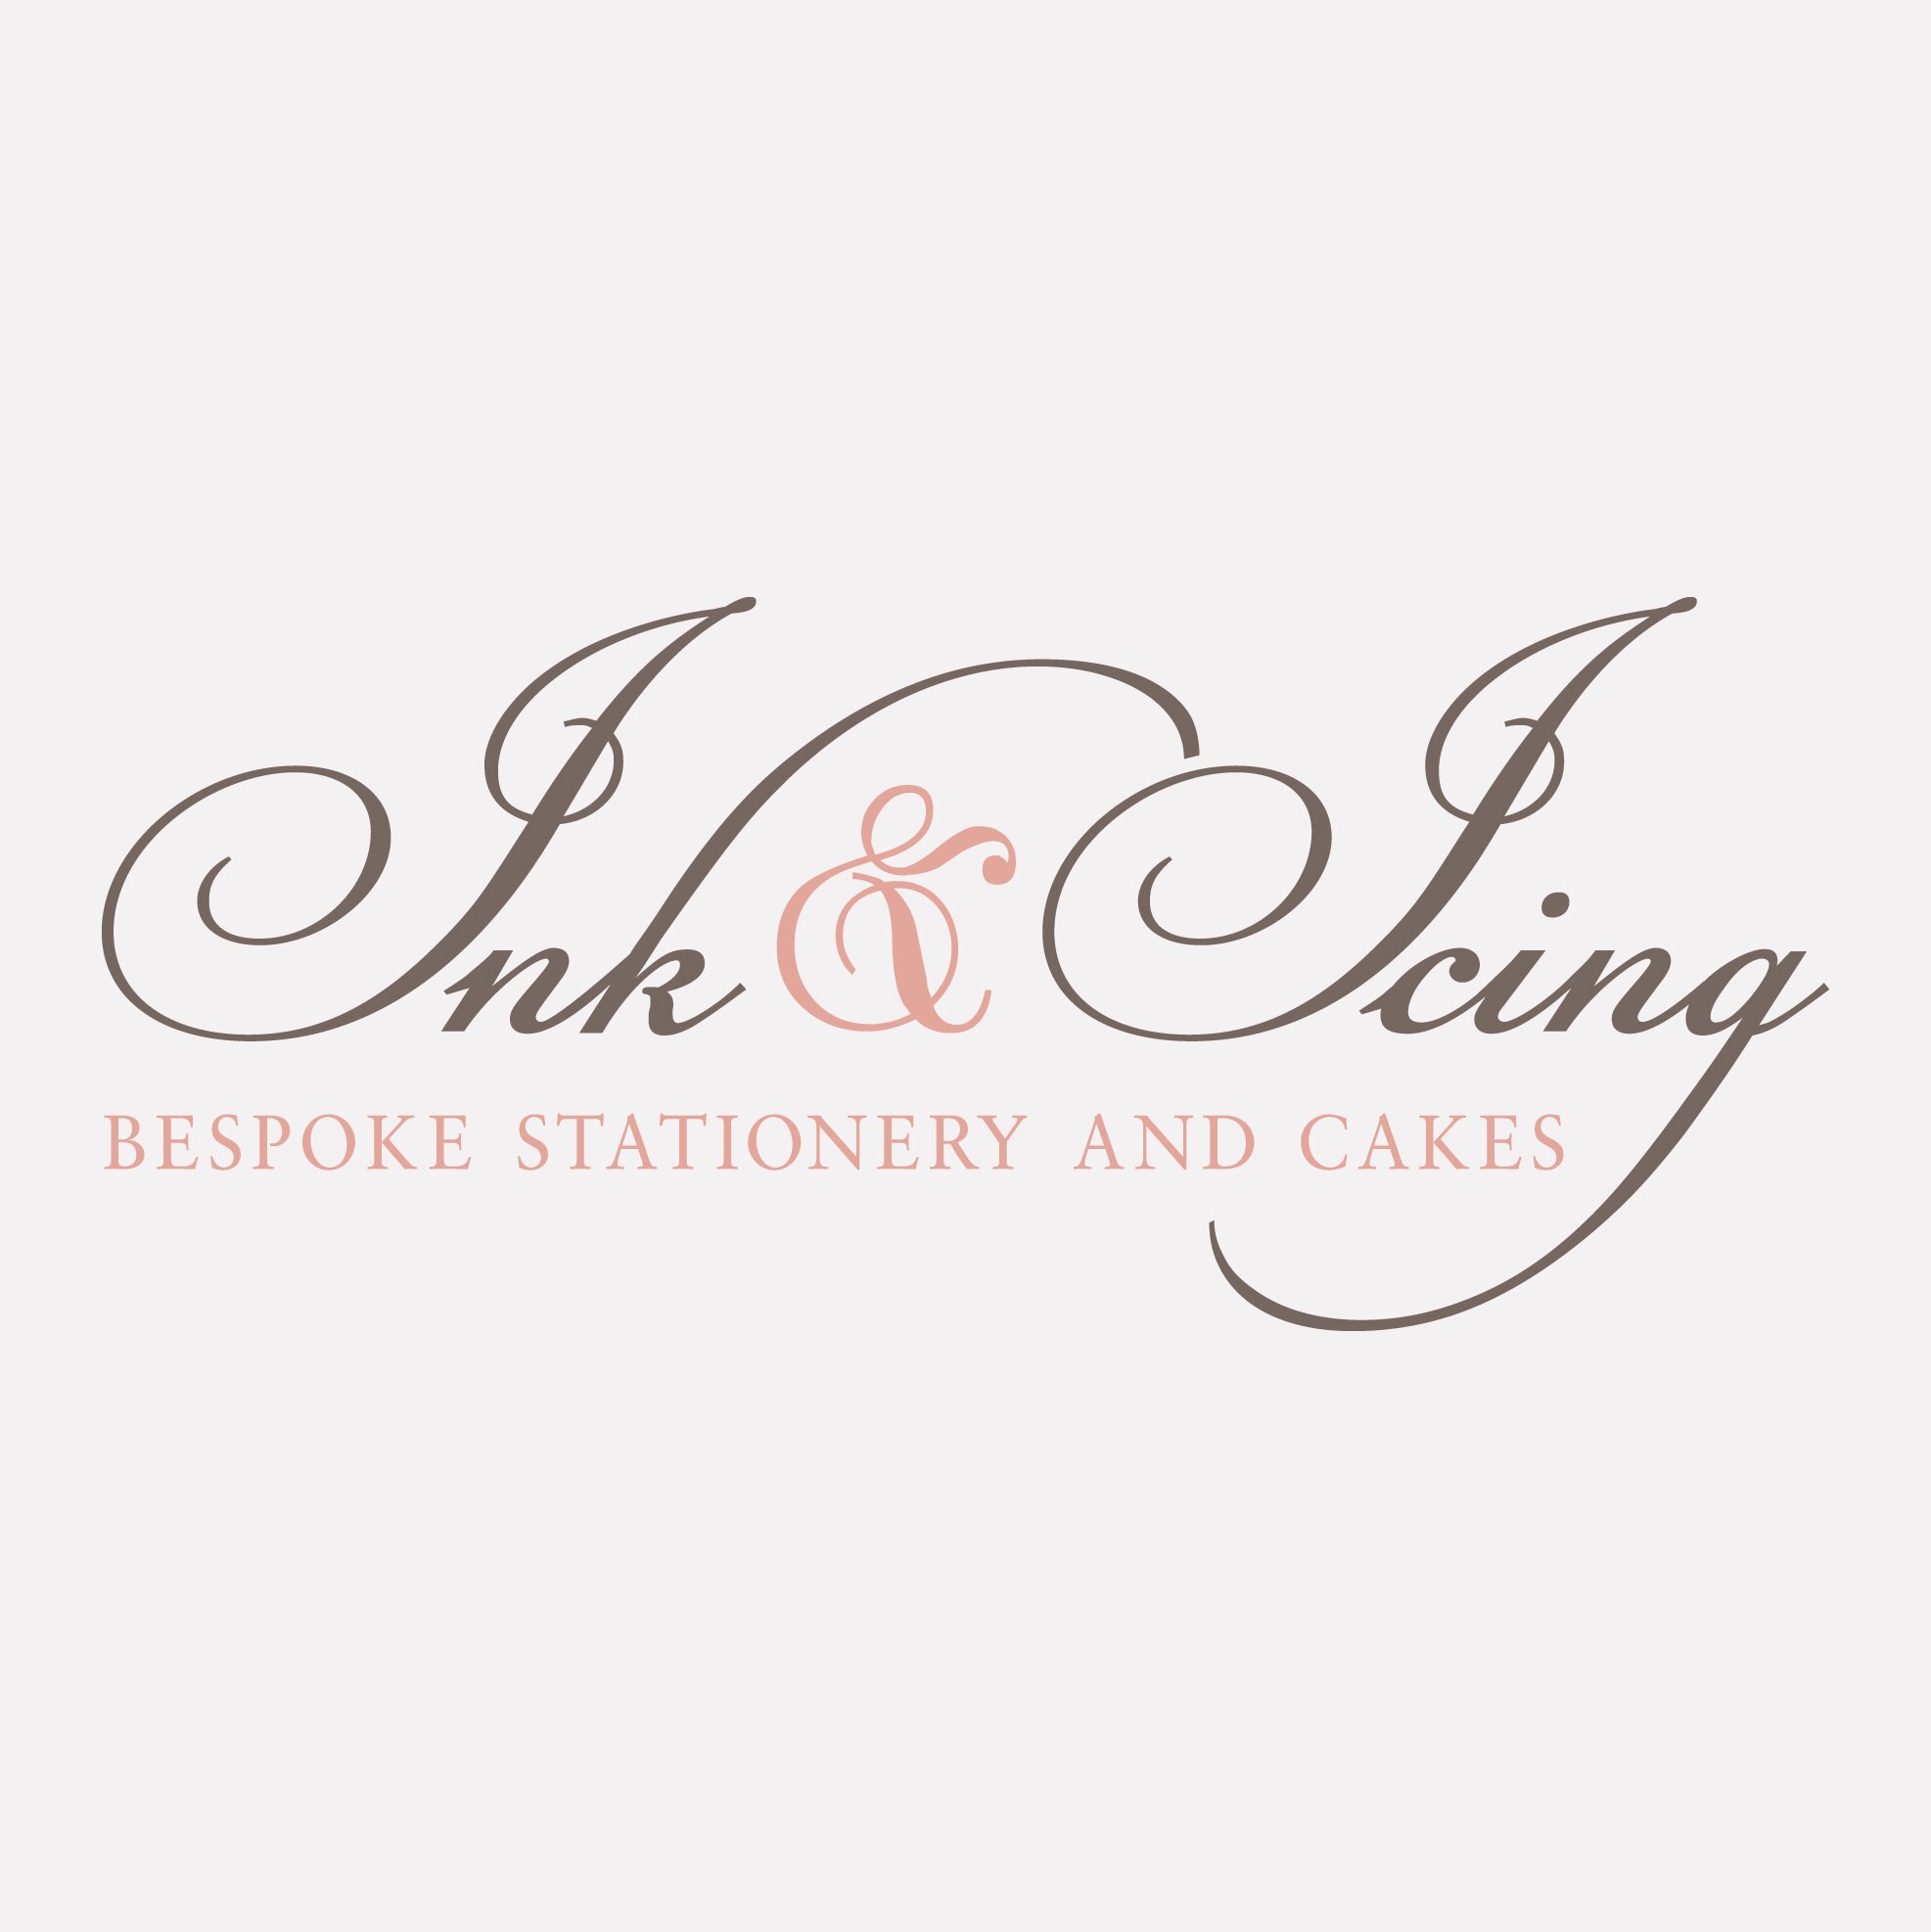 Ink & Icing is based in North East England and specialises in providing bespoke celebration cakes and printed stationery for all special occasions.